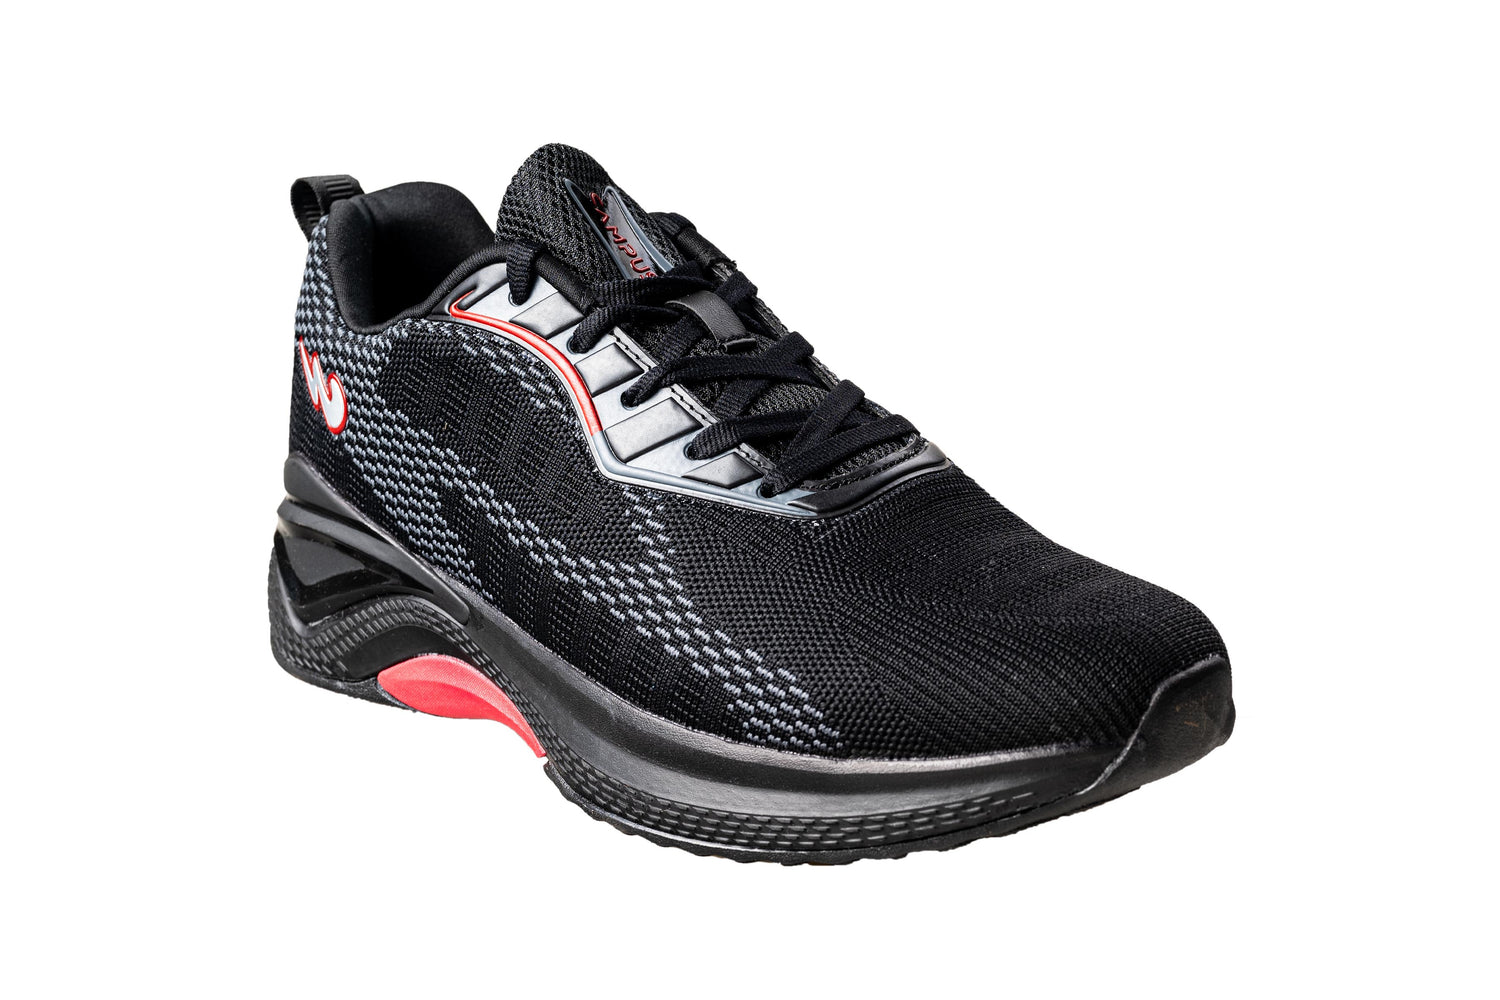 Campus Black / Red Gents Sports Shoe